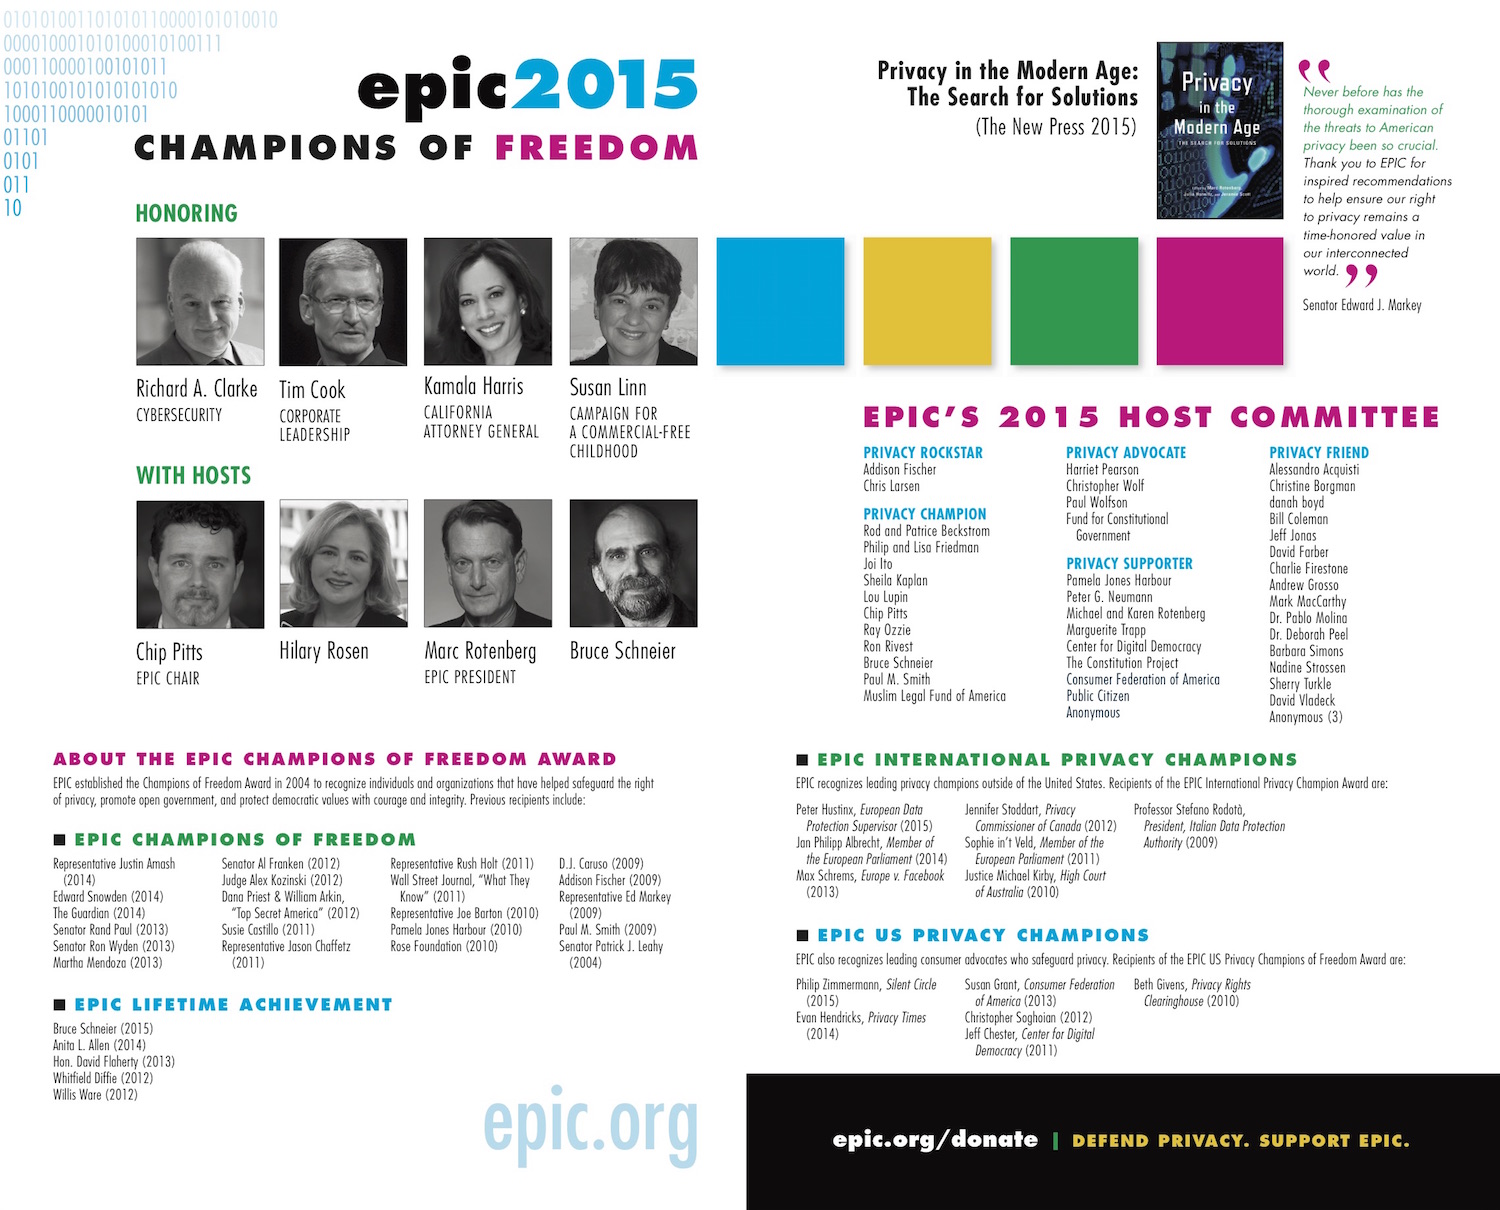 EPIC 2015 Champions of Freedom Awards Dinner Program page 2 image